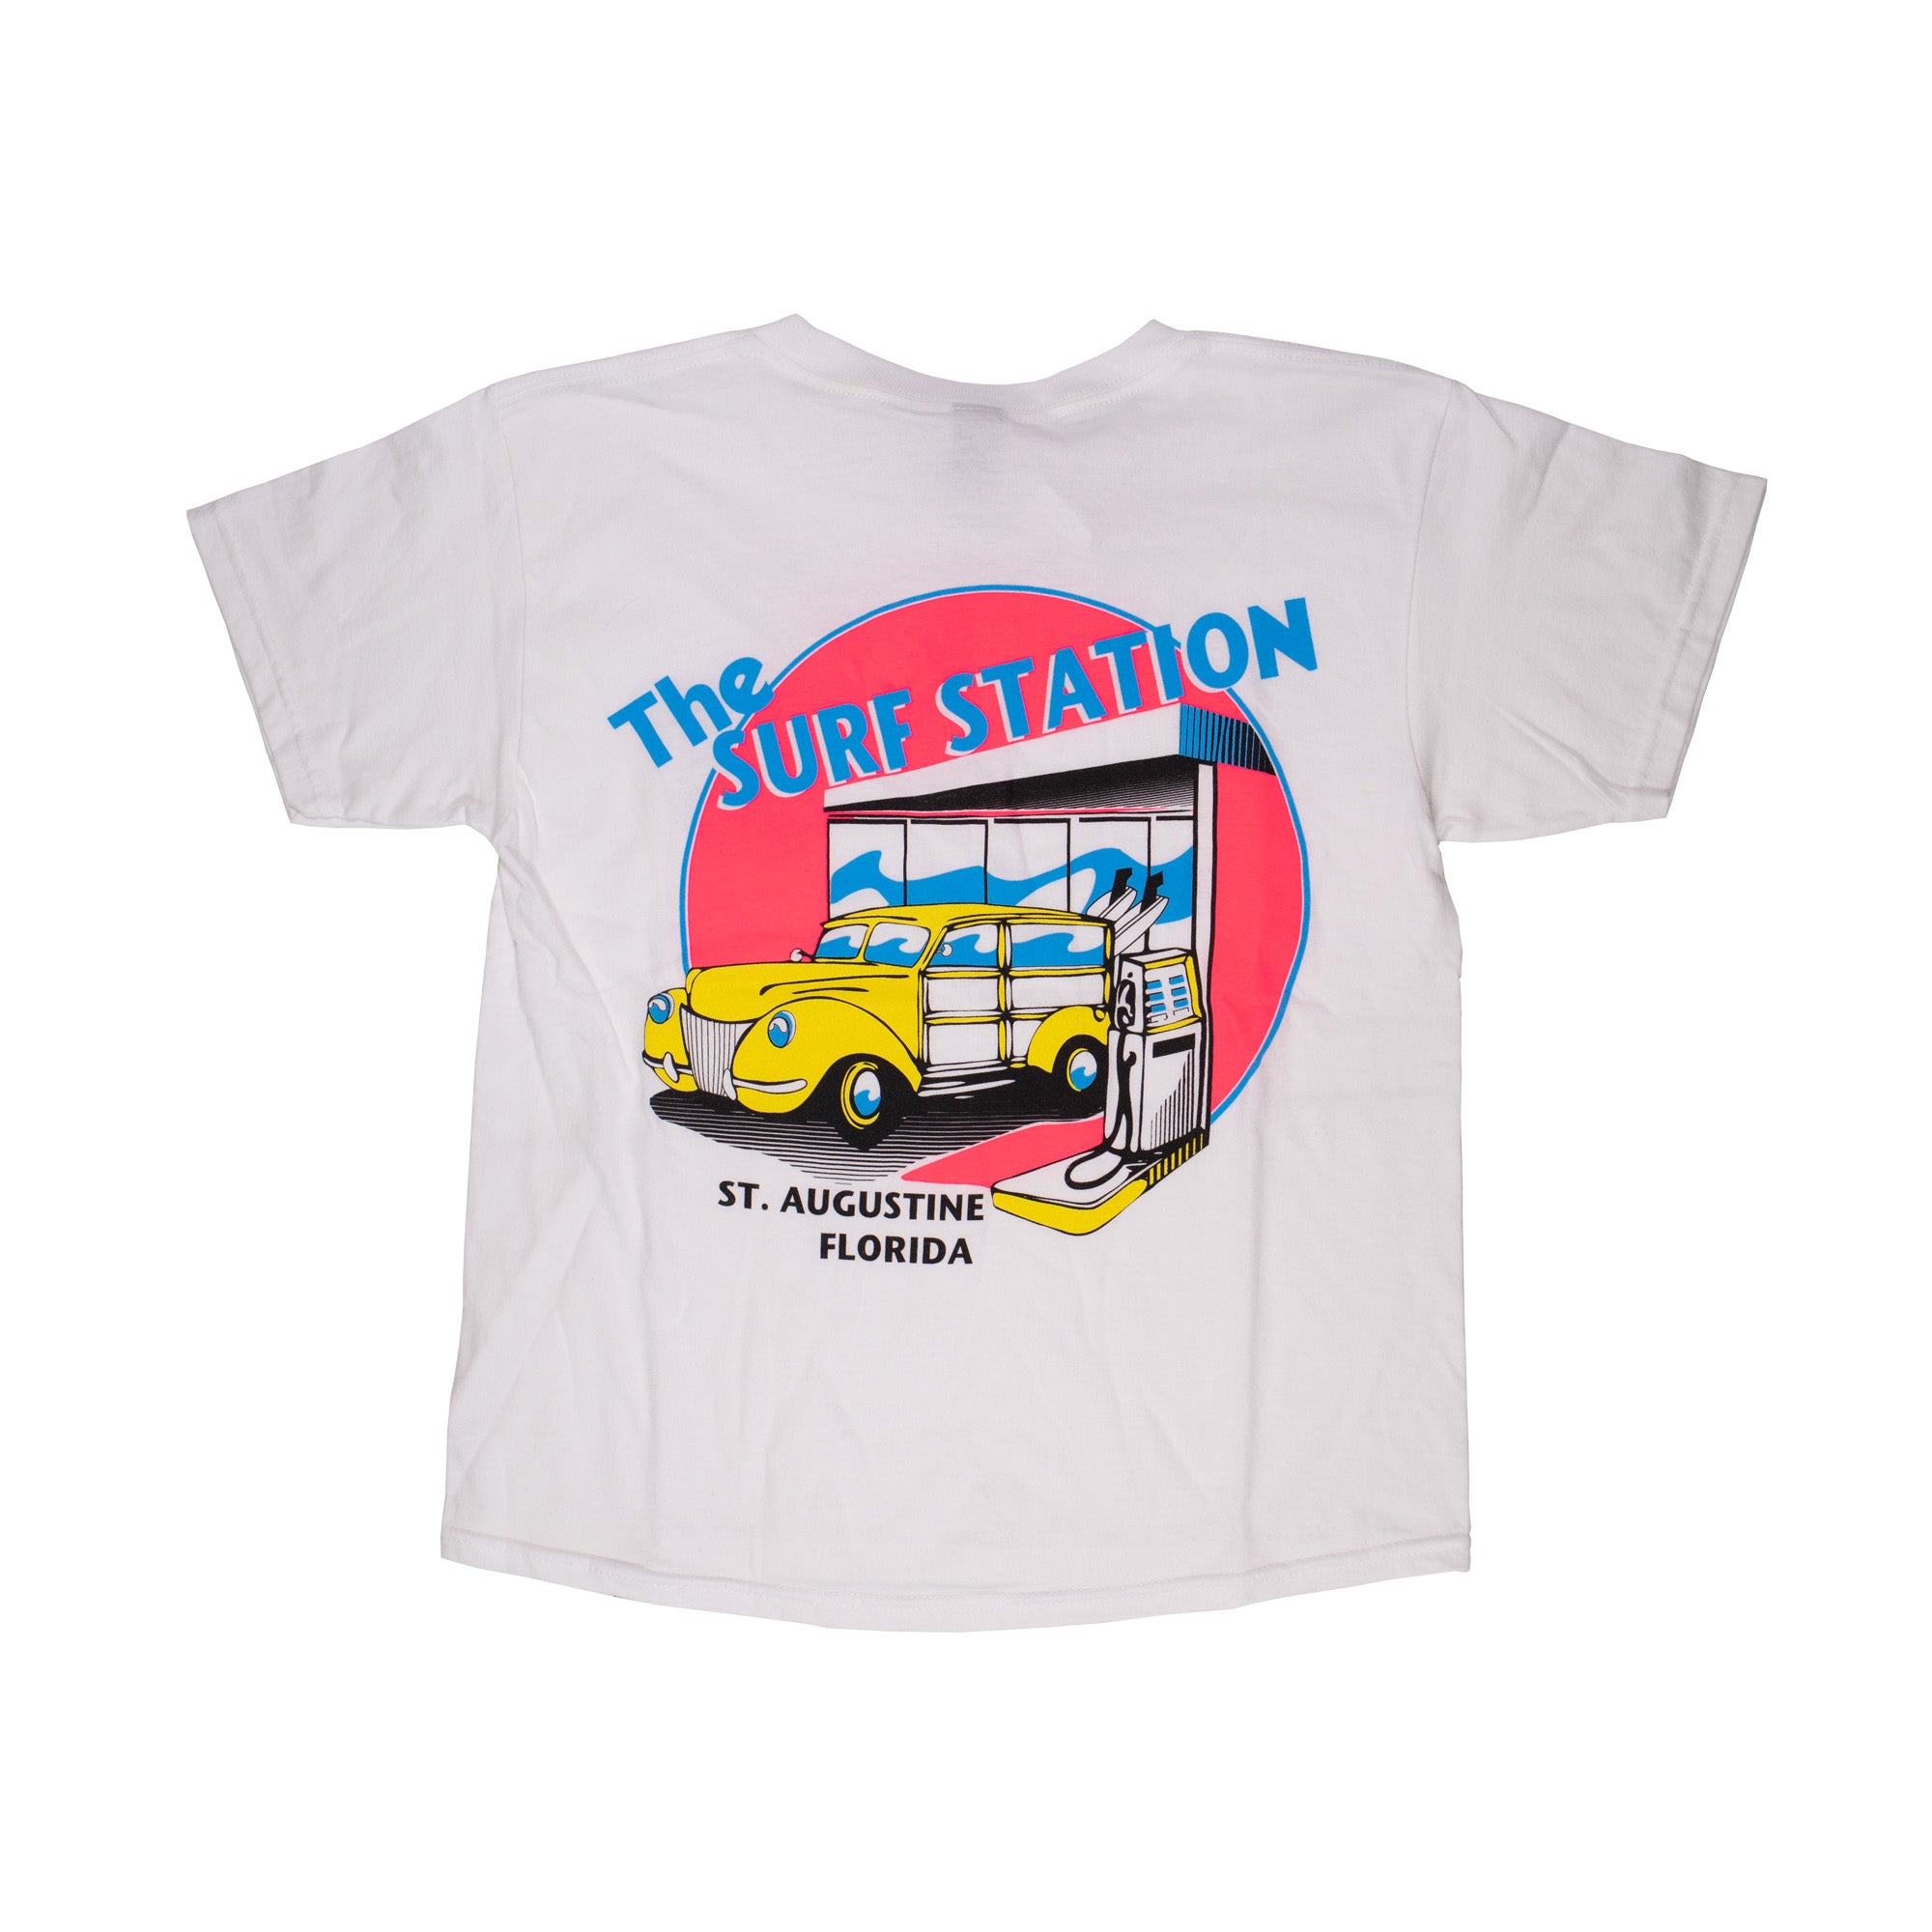 Surf Station Neon Woody Youth Boy's S/S T-Shirt